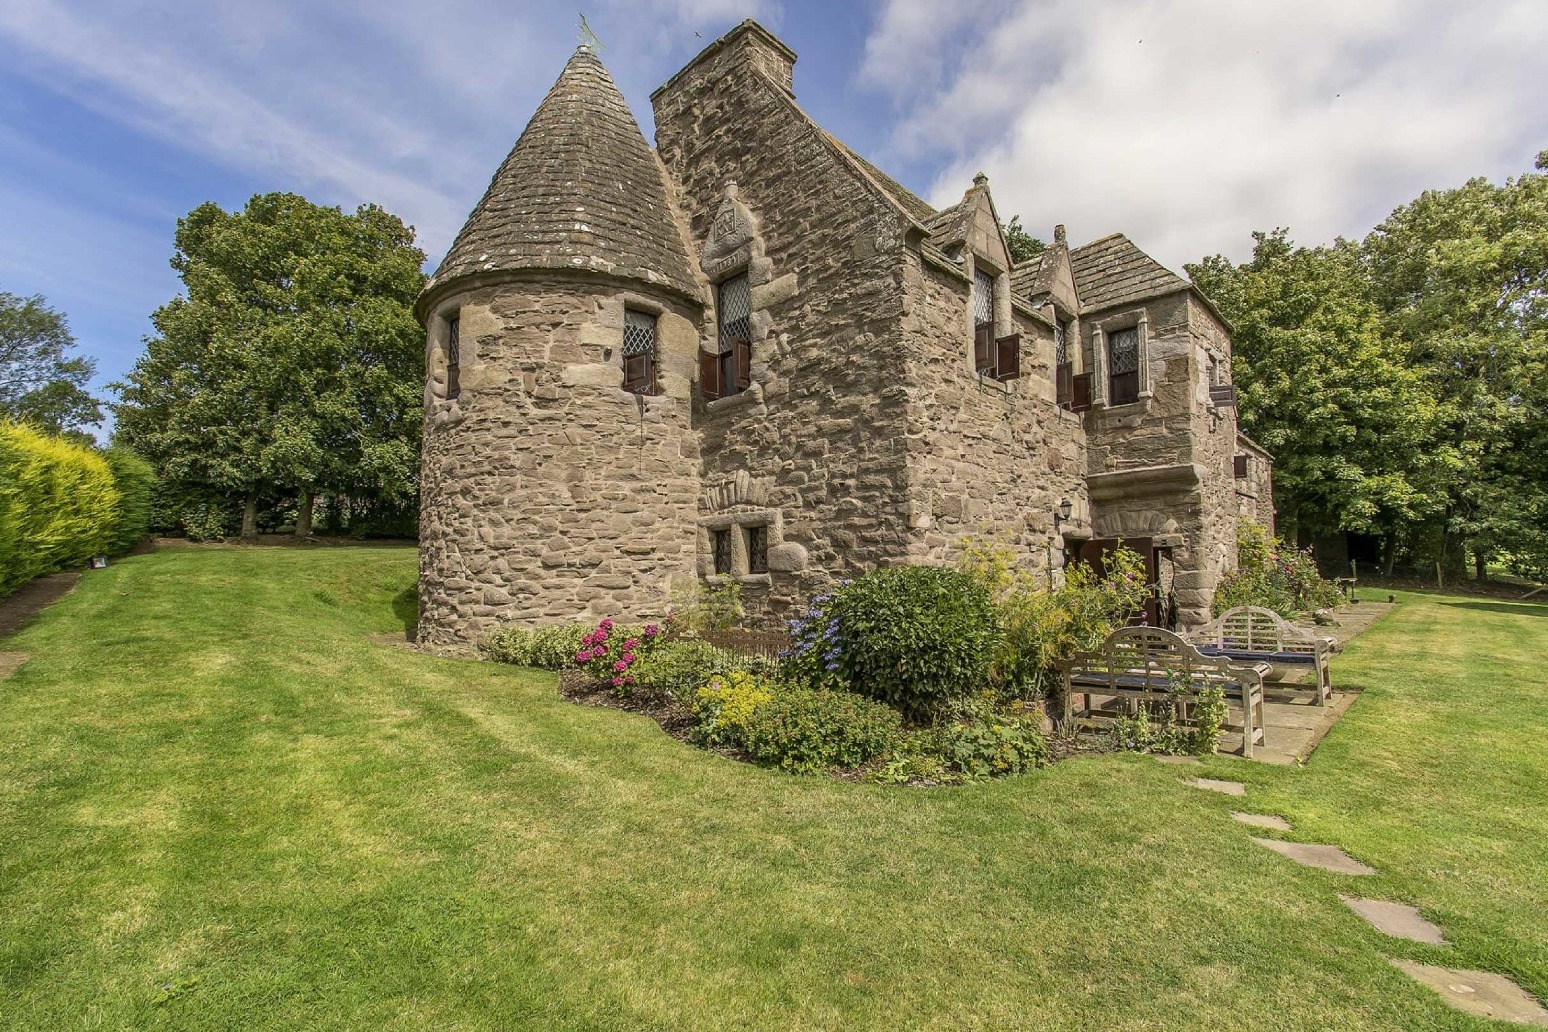 17th century Scottish castle goes on sale for more than half a million pounds 